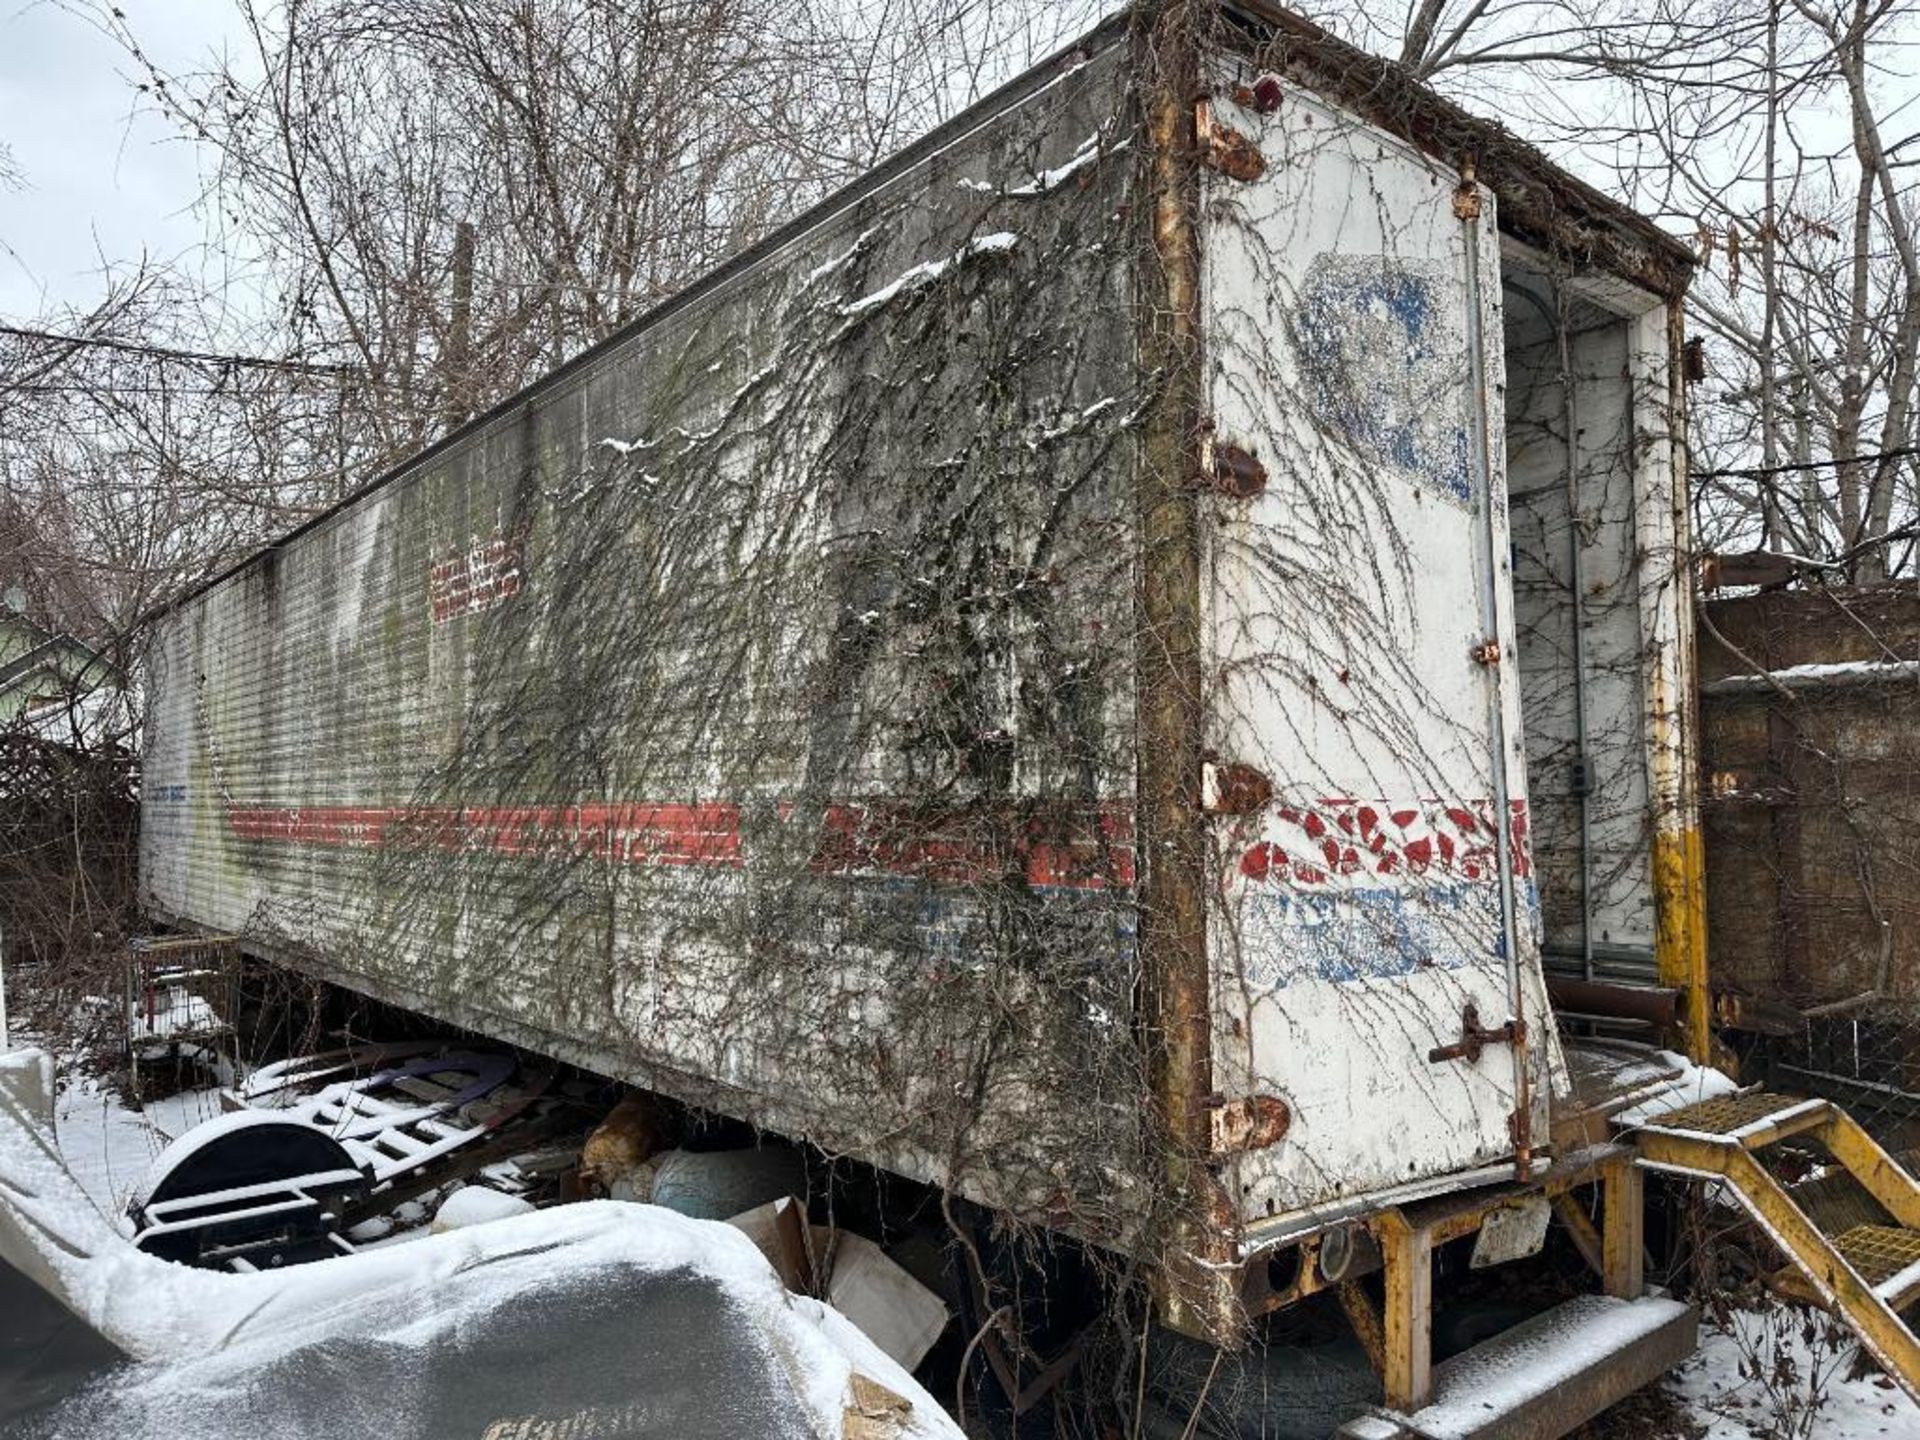 Enclosed Semi Trailer with scrap and storage brackets